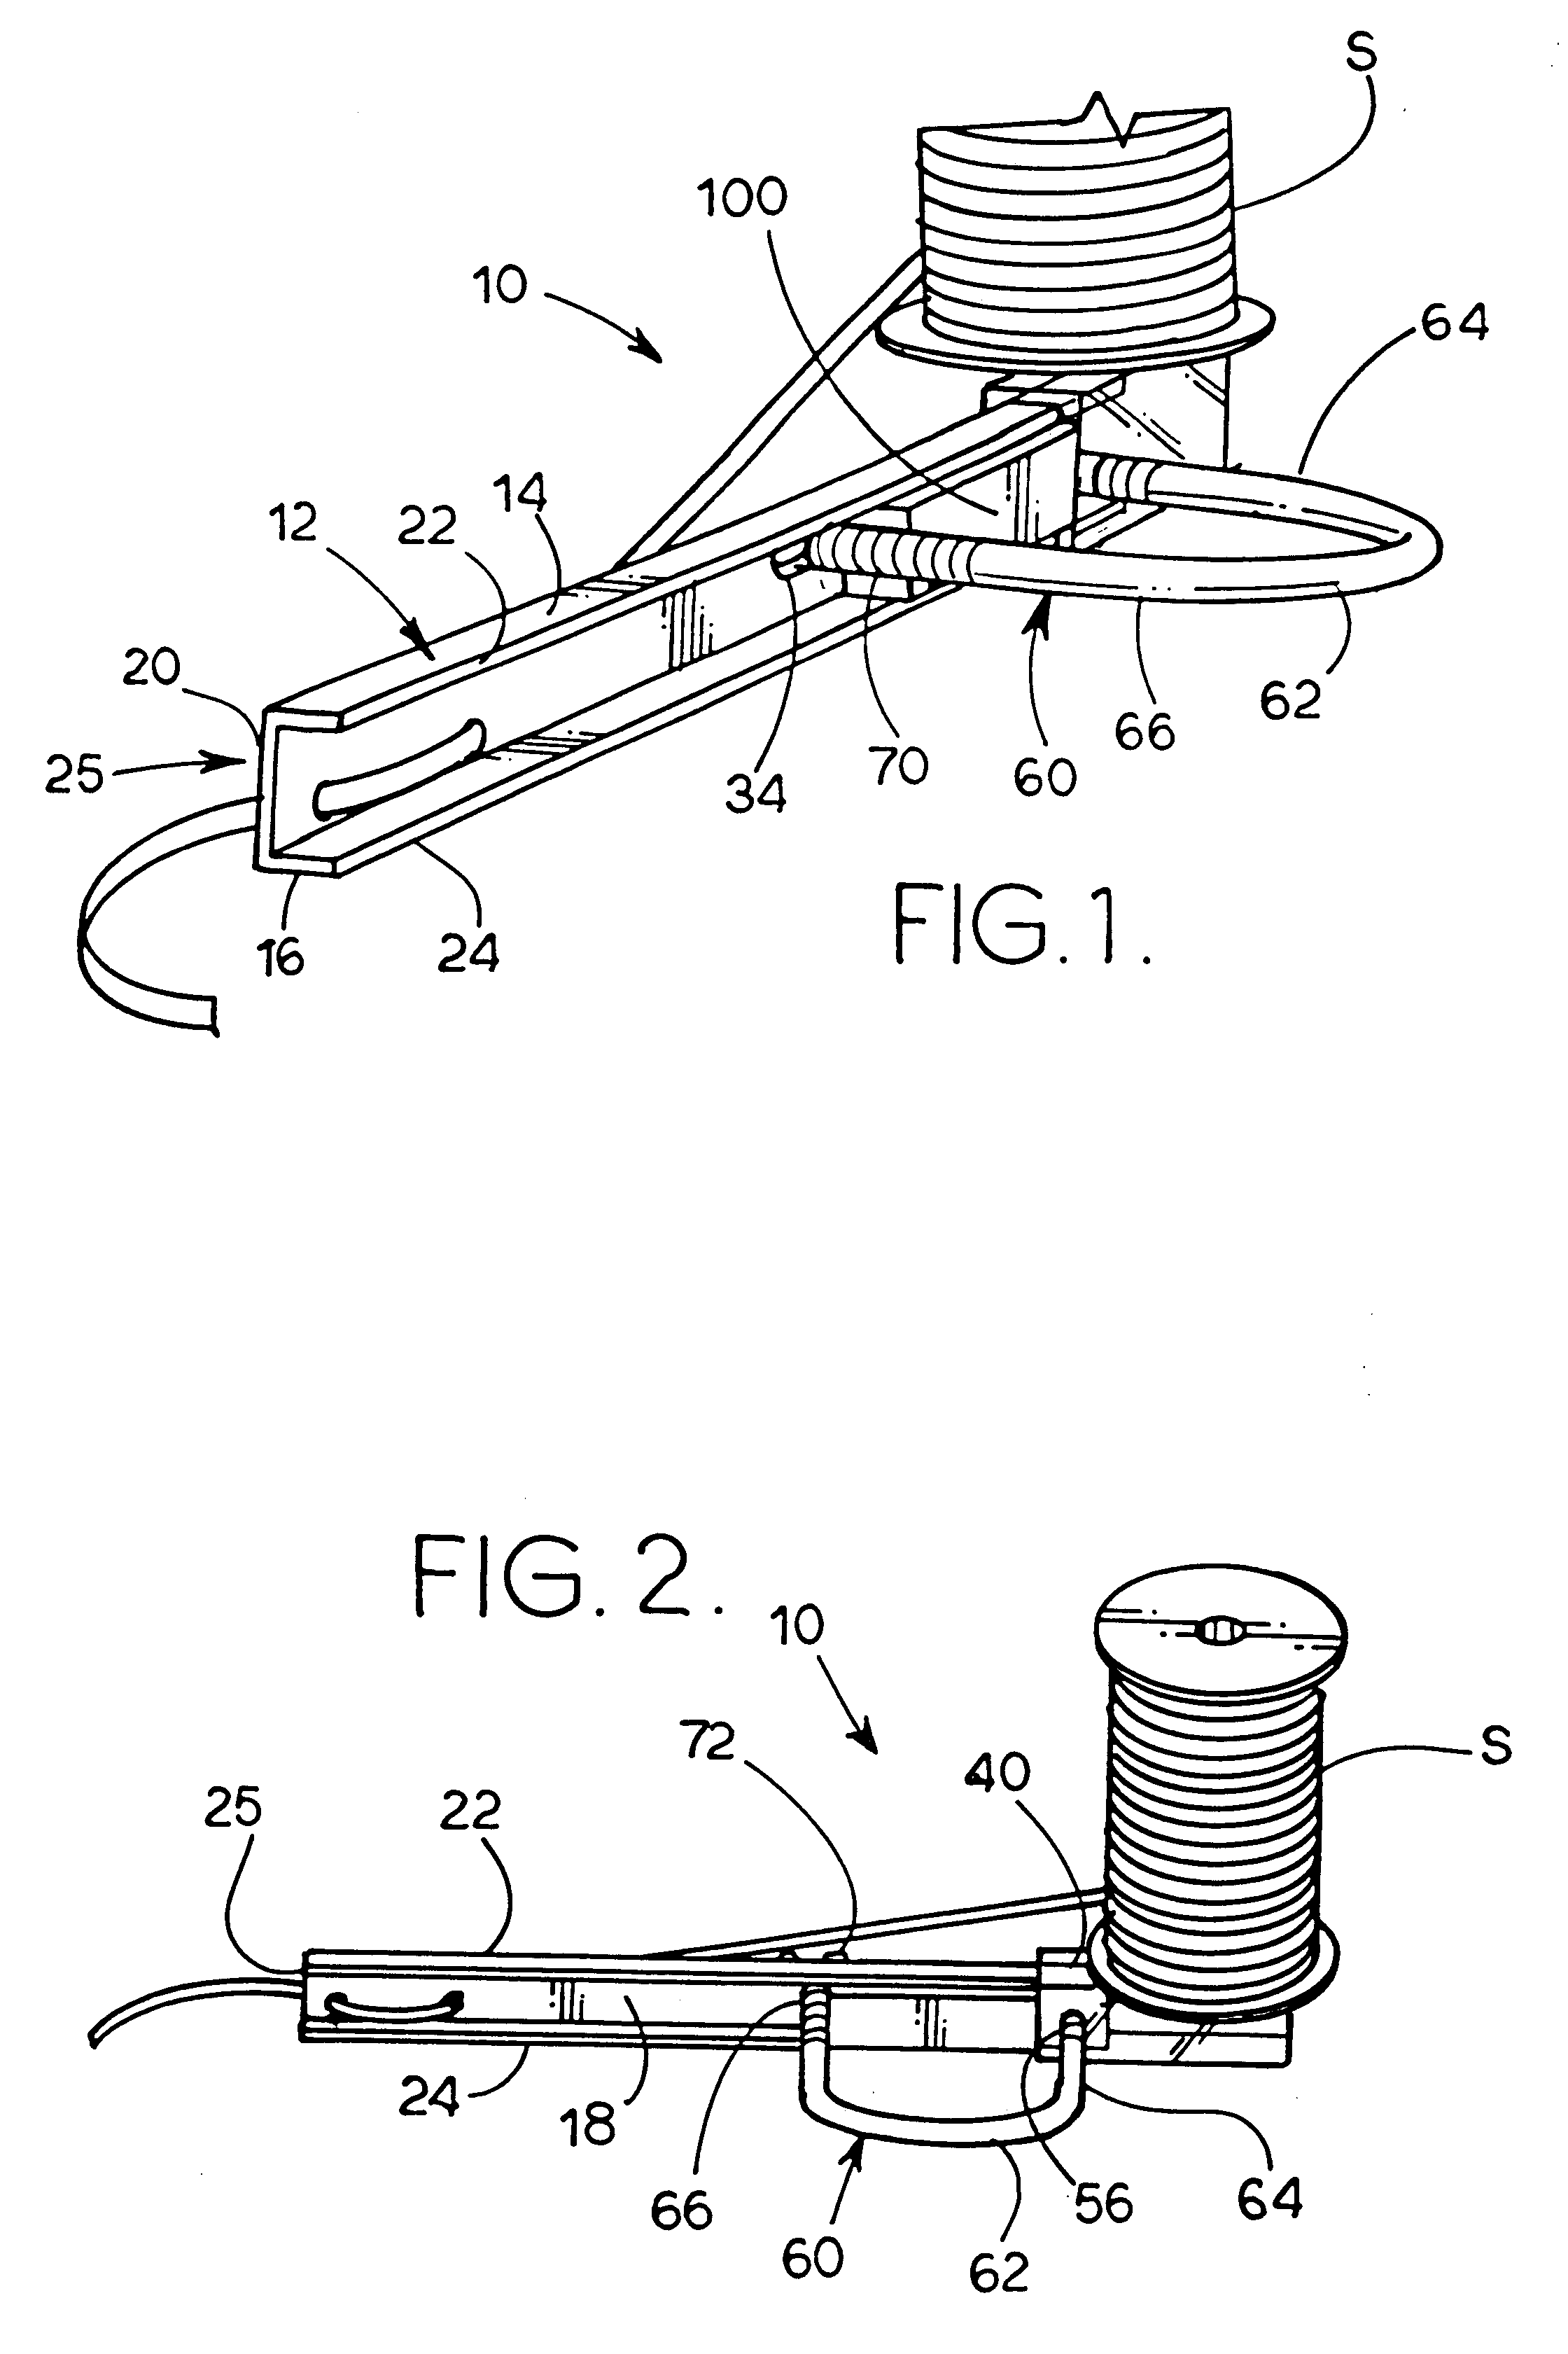 Unit for tying a balloon and securing a ribbon to the balloon